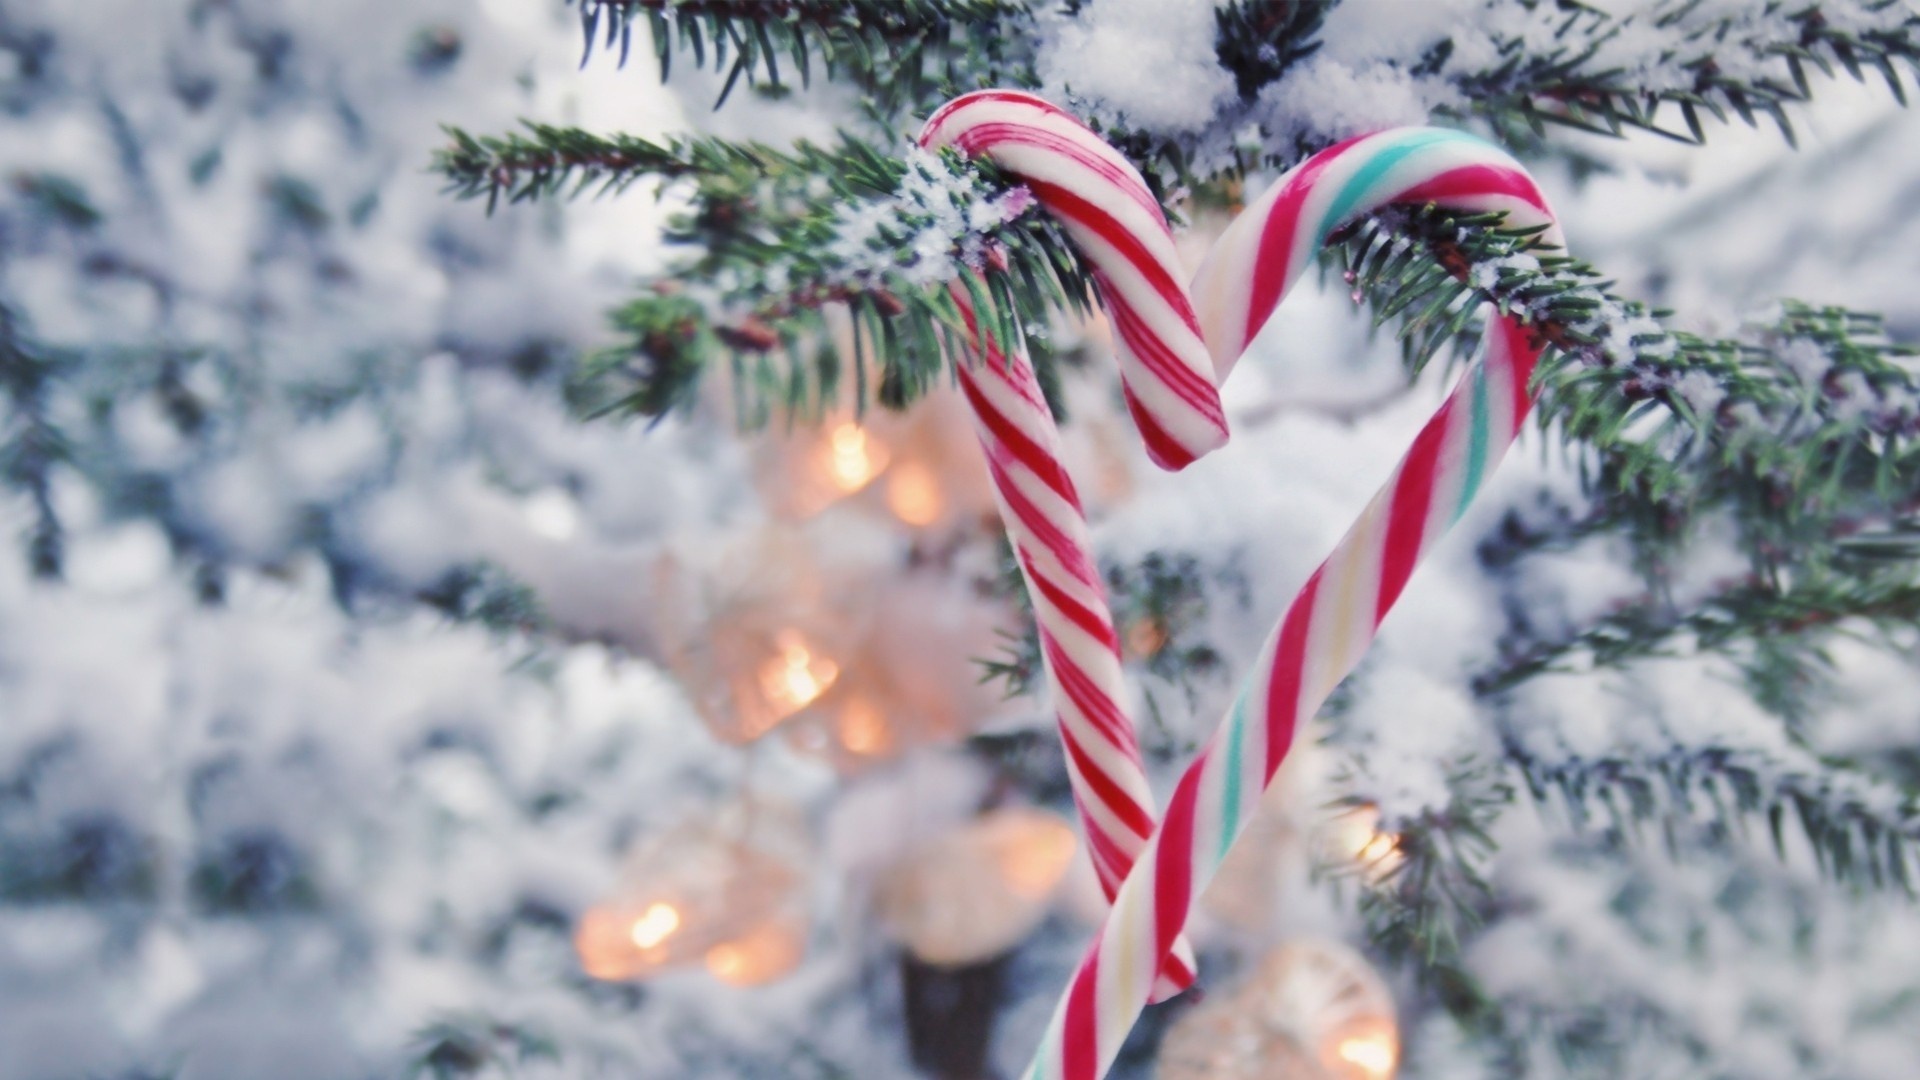 Christmas aesthetic, Candy canes wallpapers, Festive designs, Holiday cheer, 1920x1080 Full HD Desktop